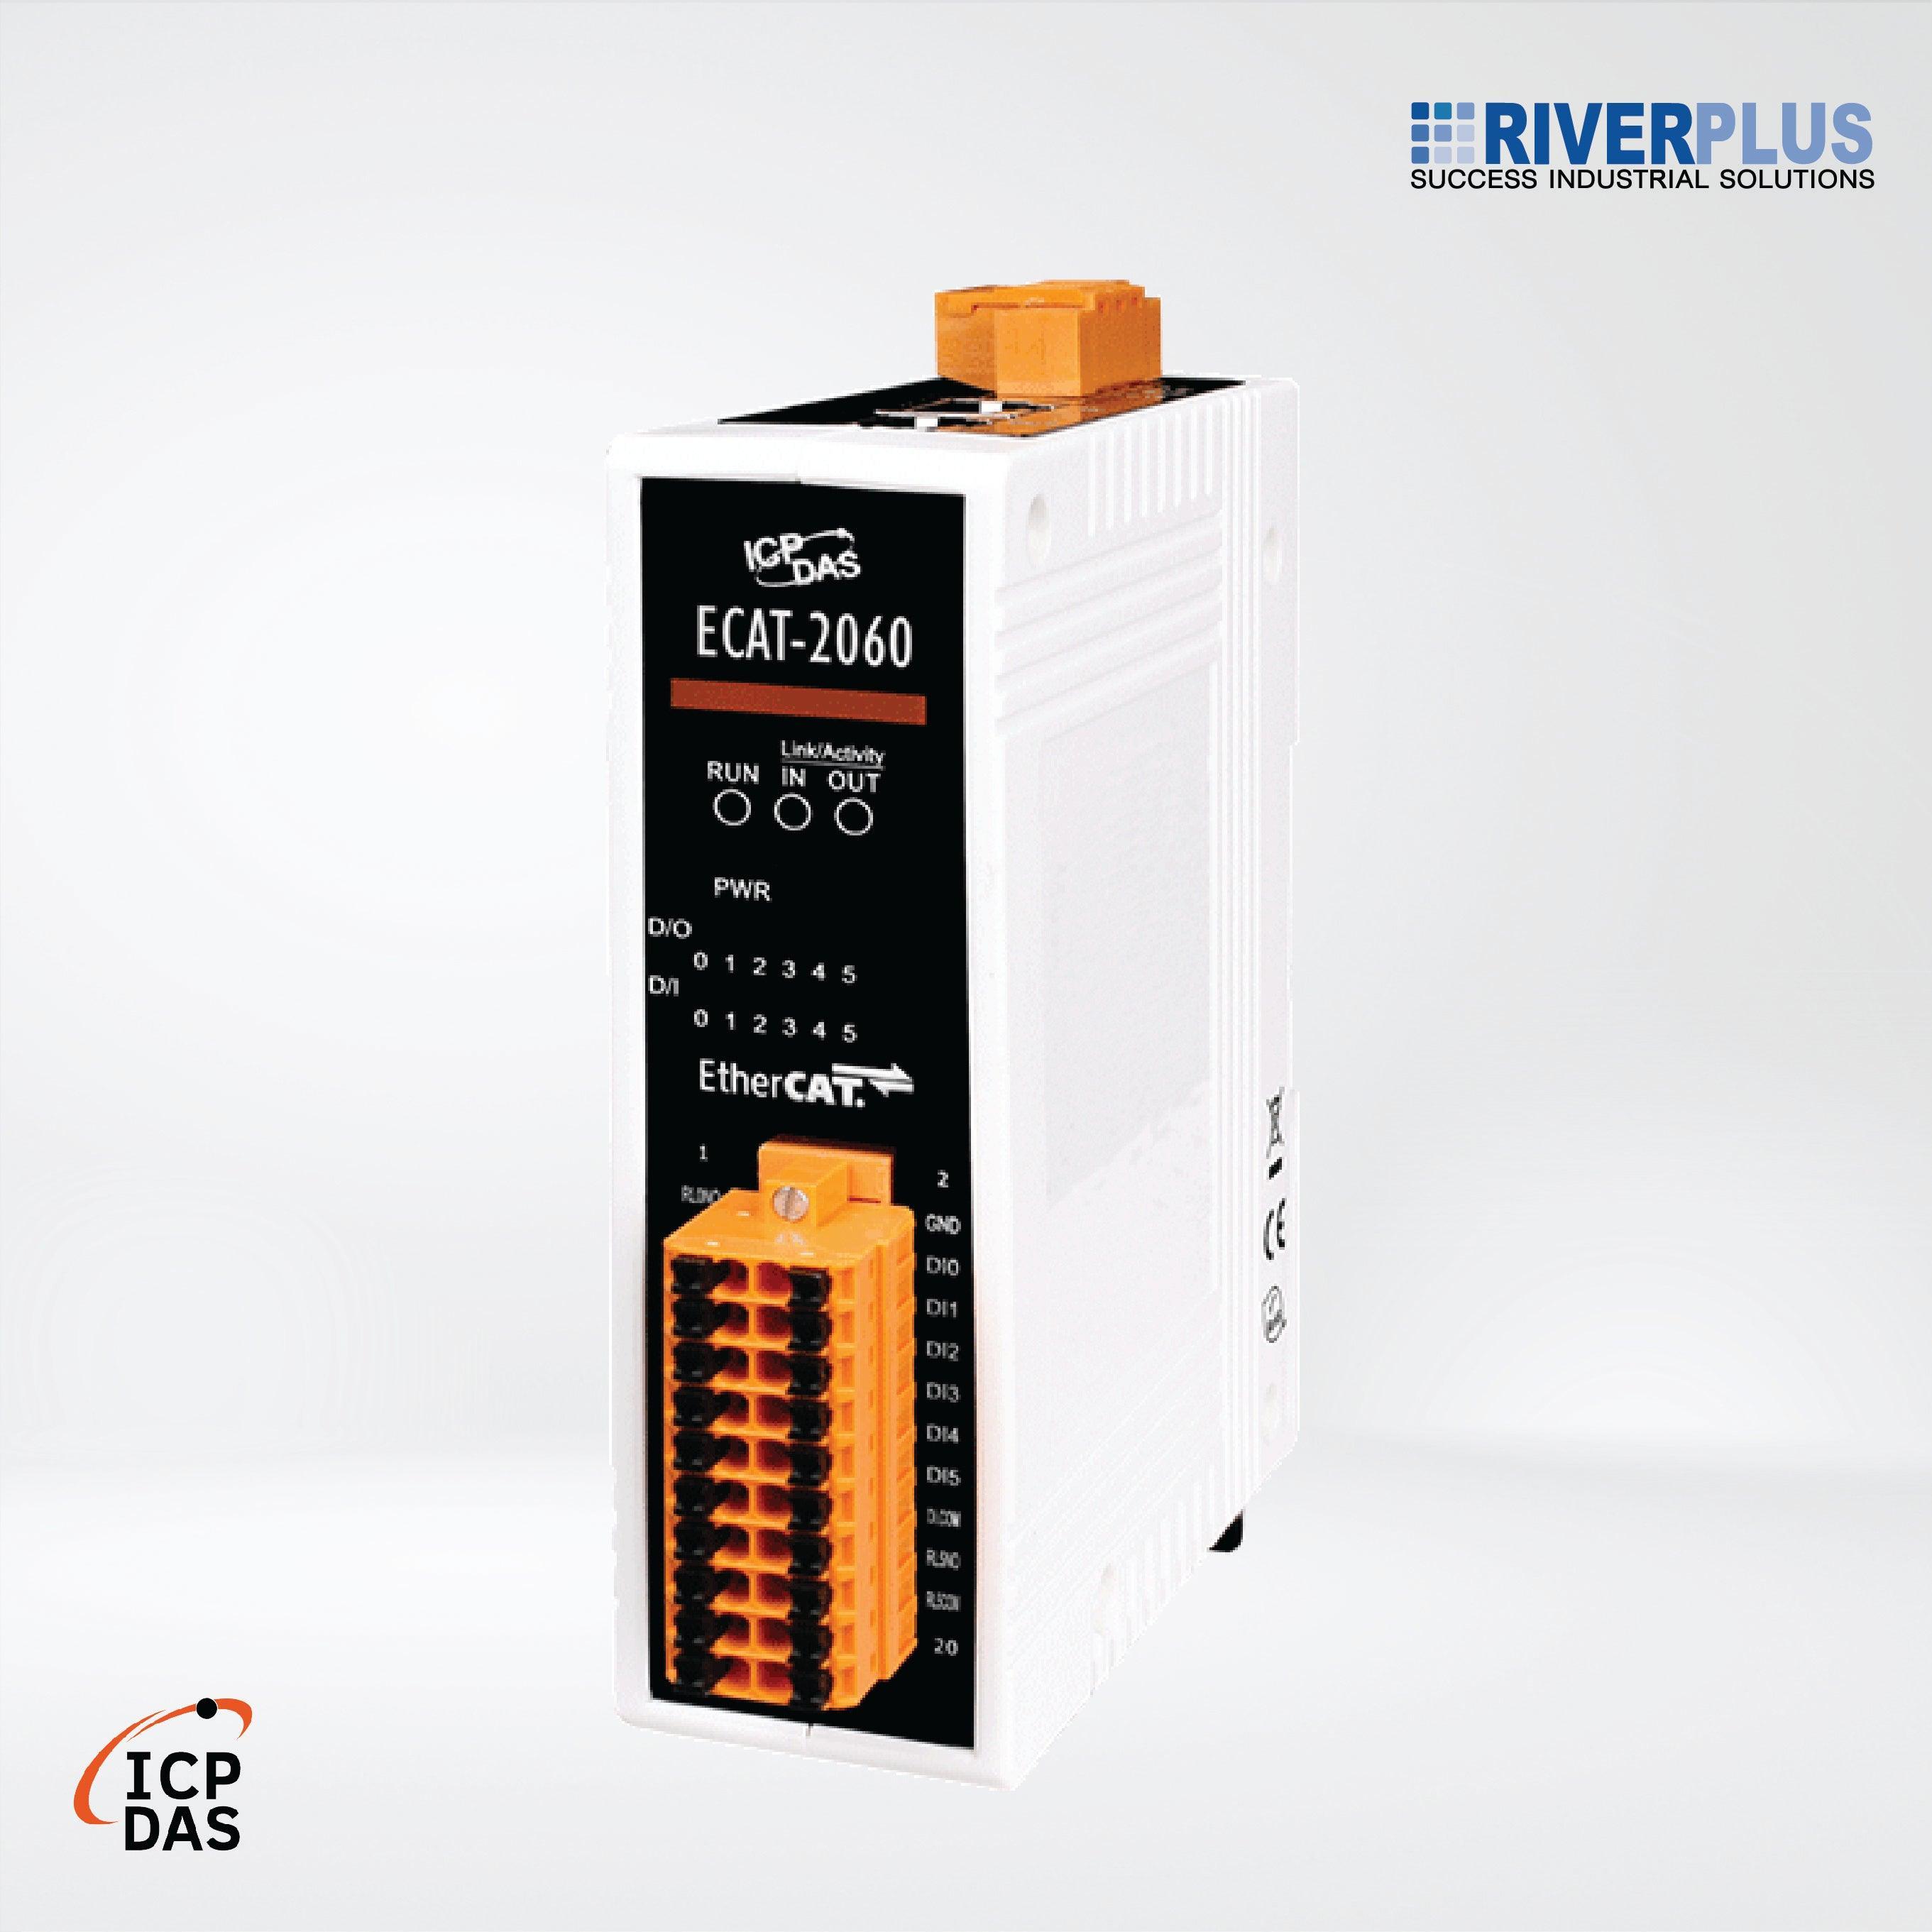 ECAT-2060 EtherCAT Slave I/O Module with Isolated 6-ch DI and 6-ch Relay - Riverplus